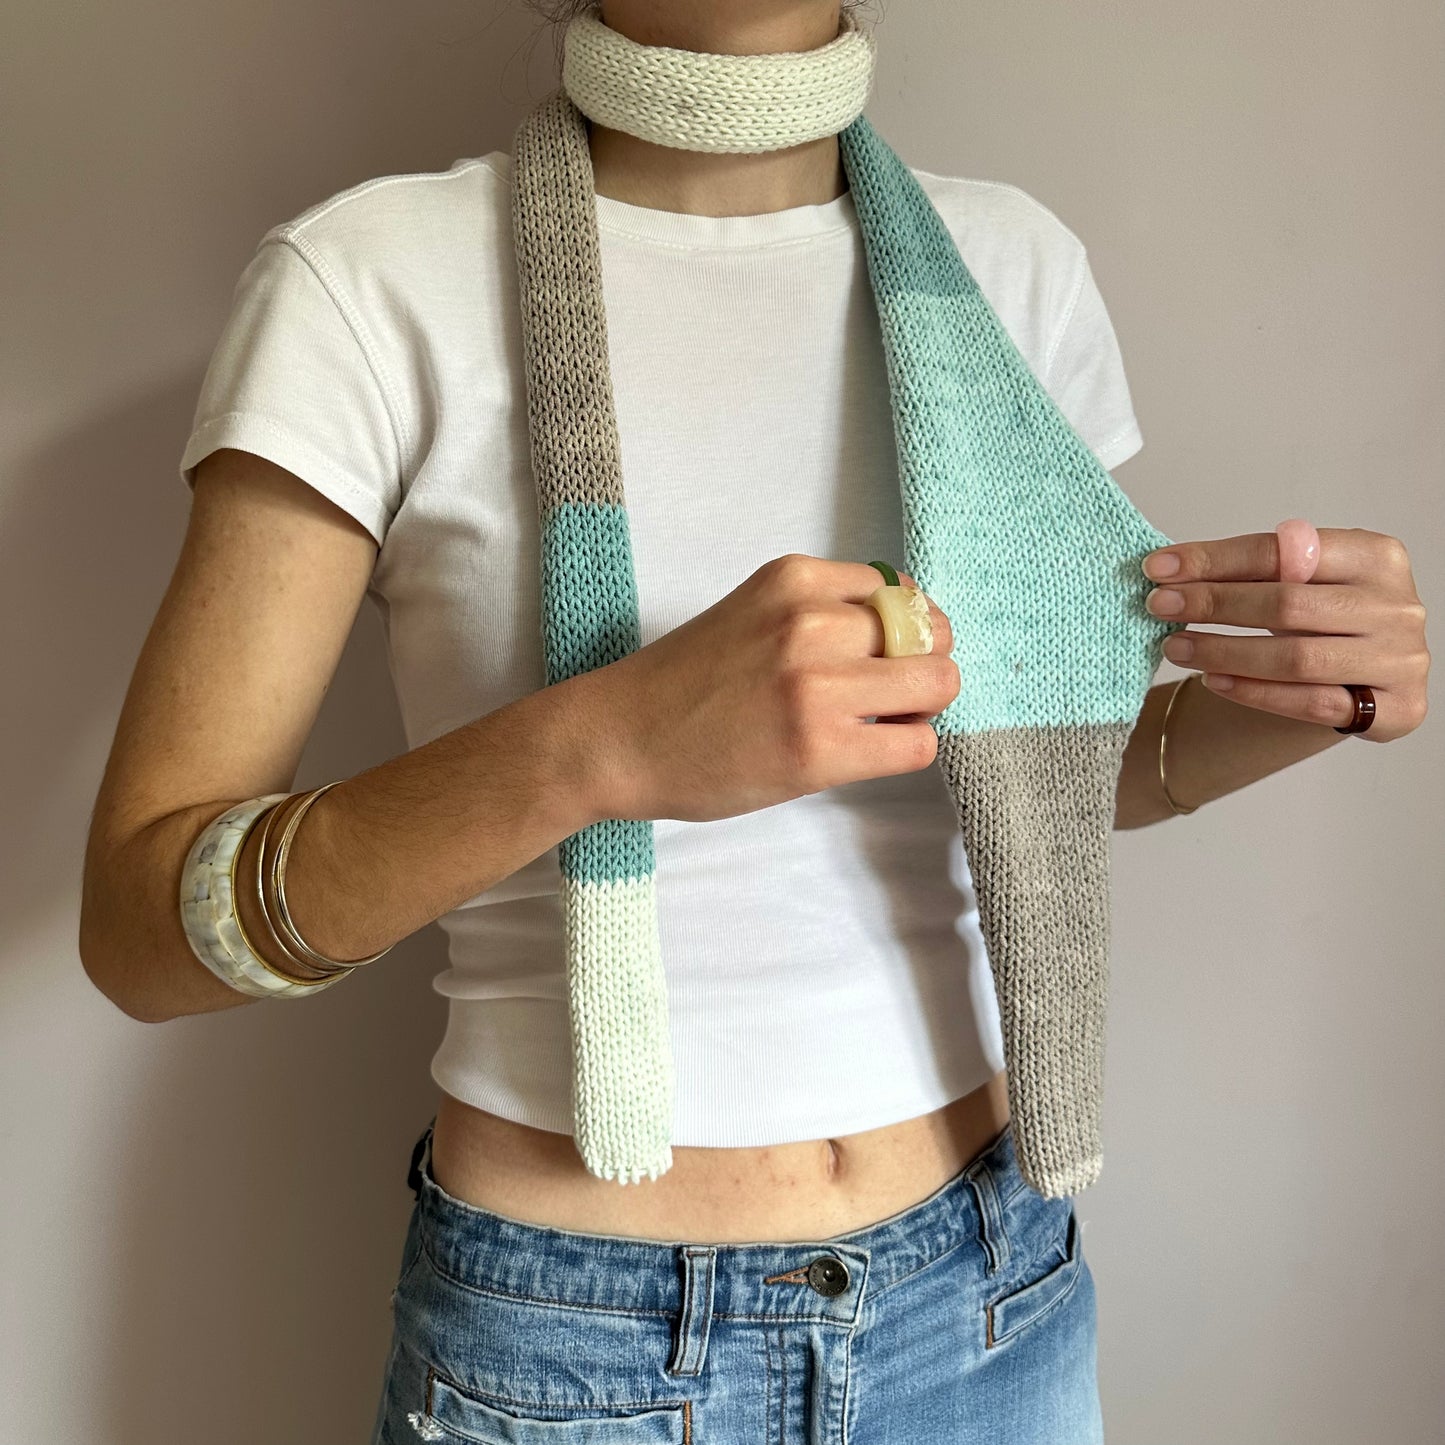 Handmade knitted colour block skinny scarf in baby blue, cream and beige